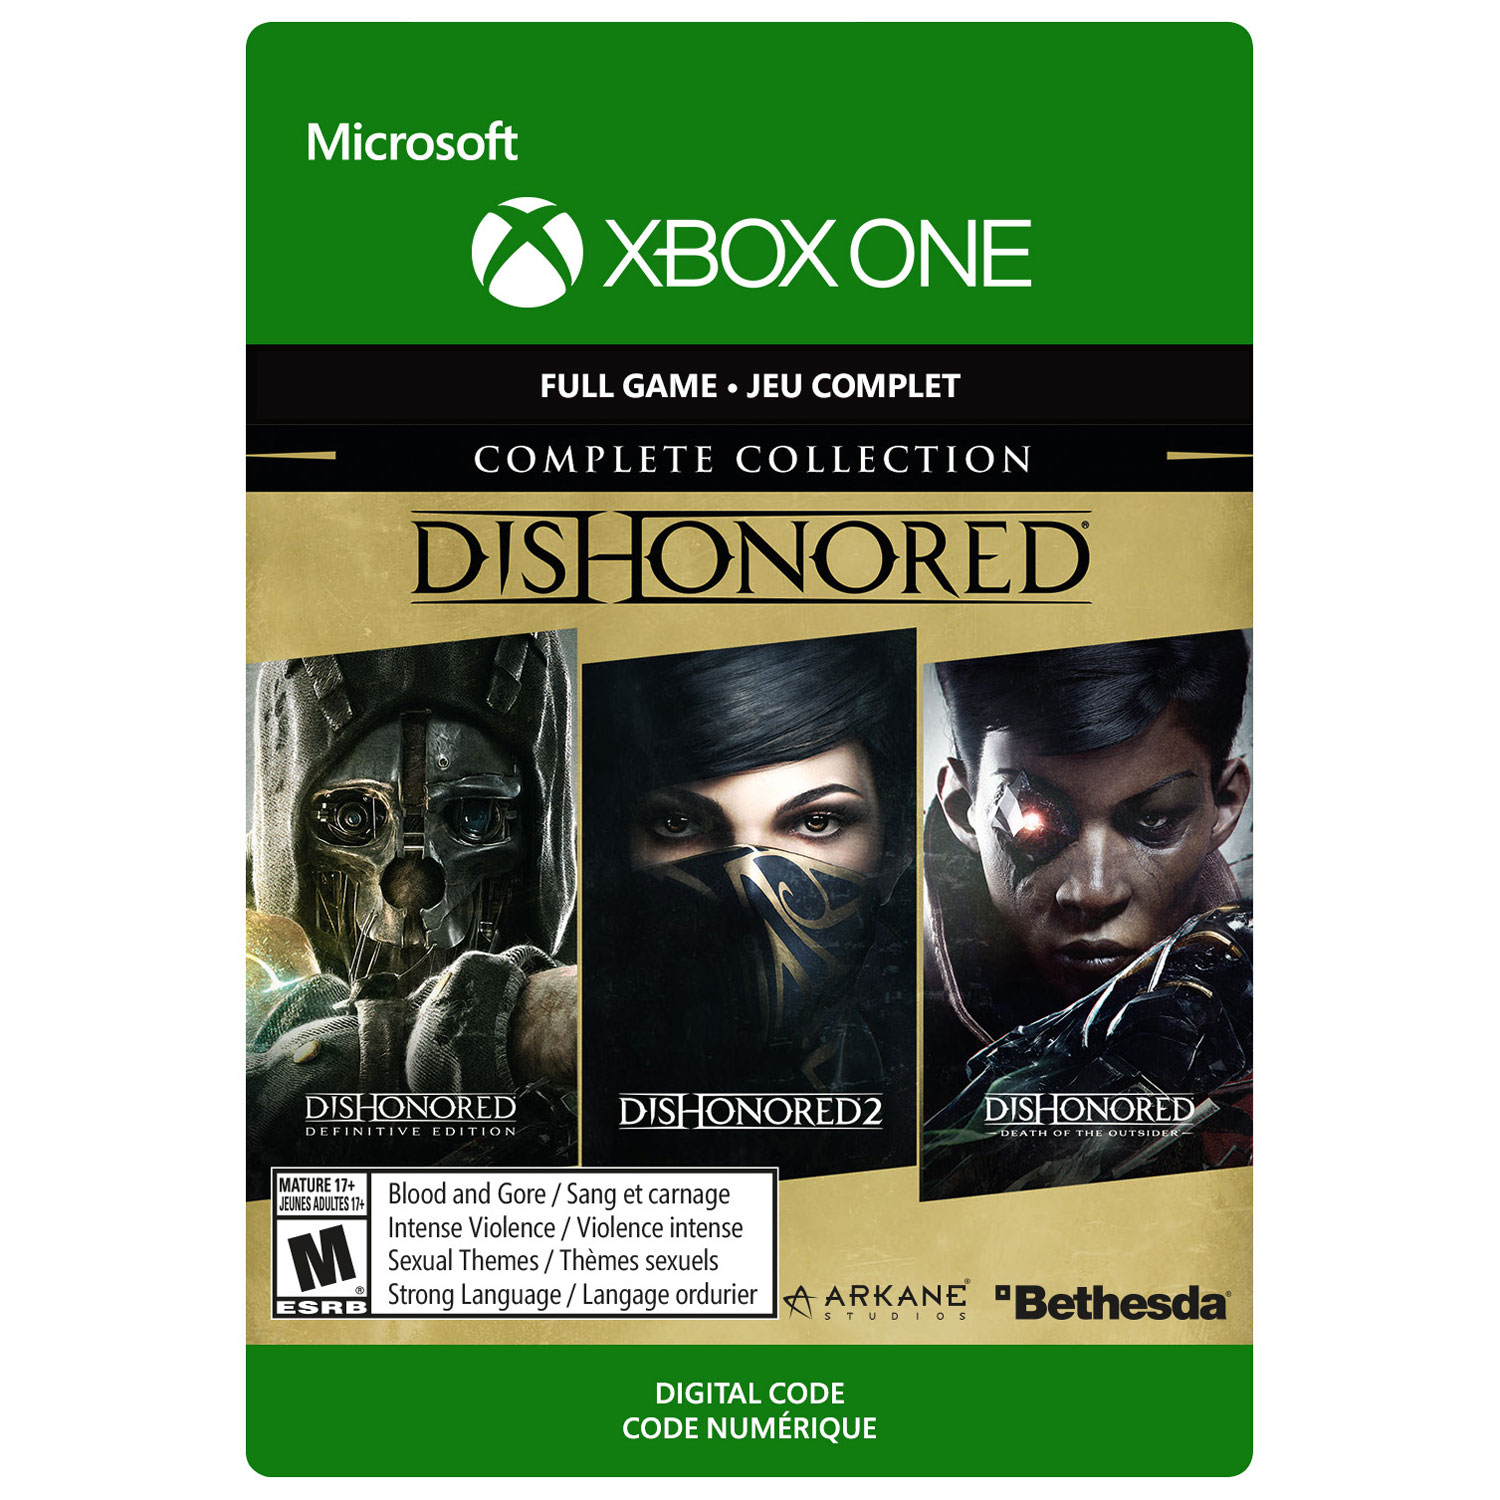 Dishonored Complete Collection (Xbox One) - Digital Download